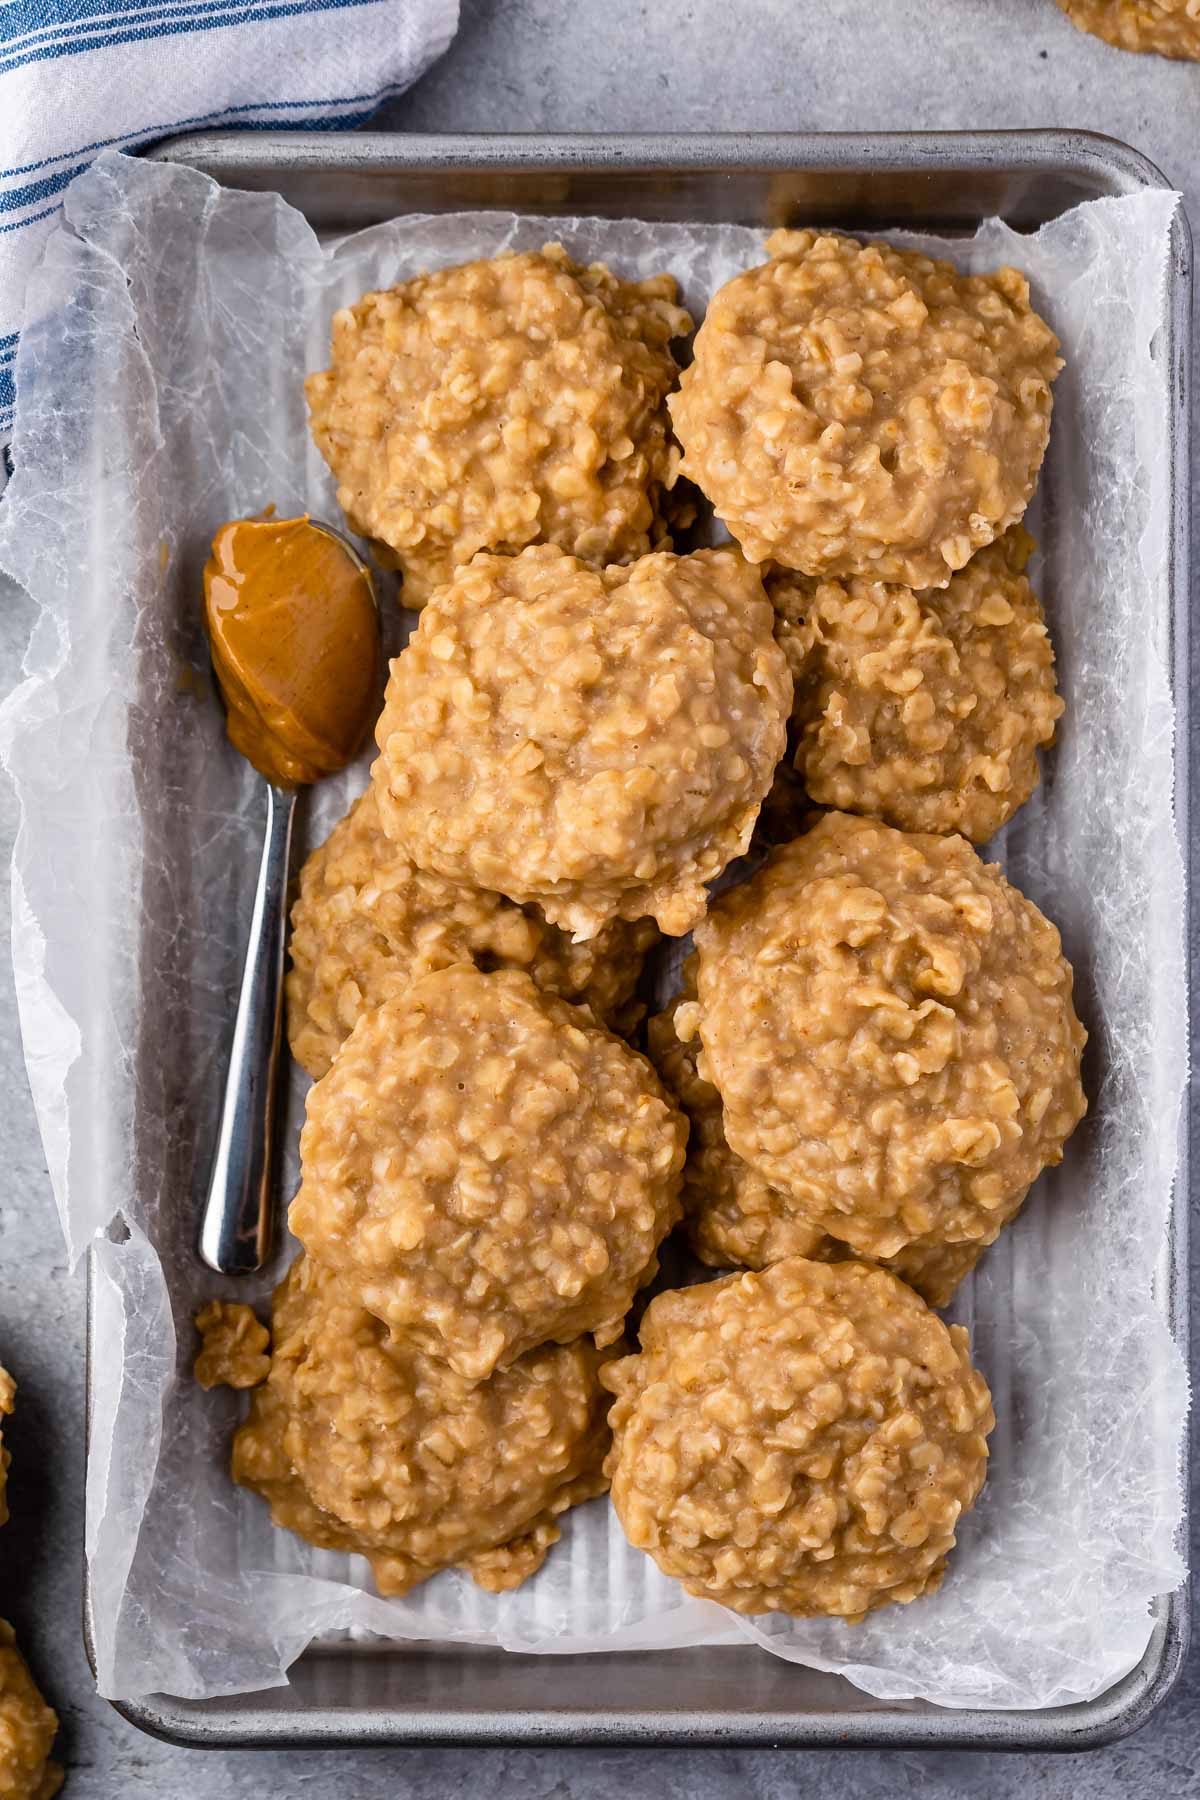 Peanut butter no bake cookies on parchment paper next to a spoonful of peanut butter